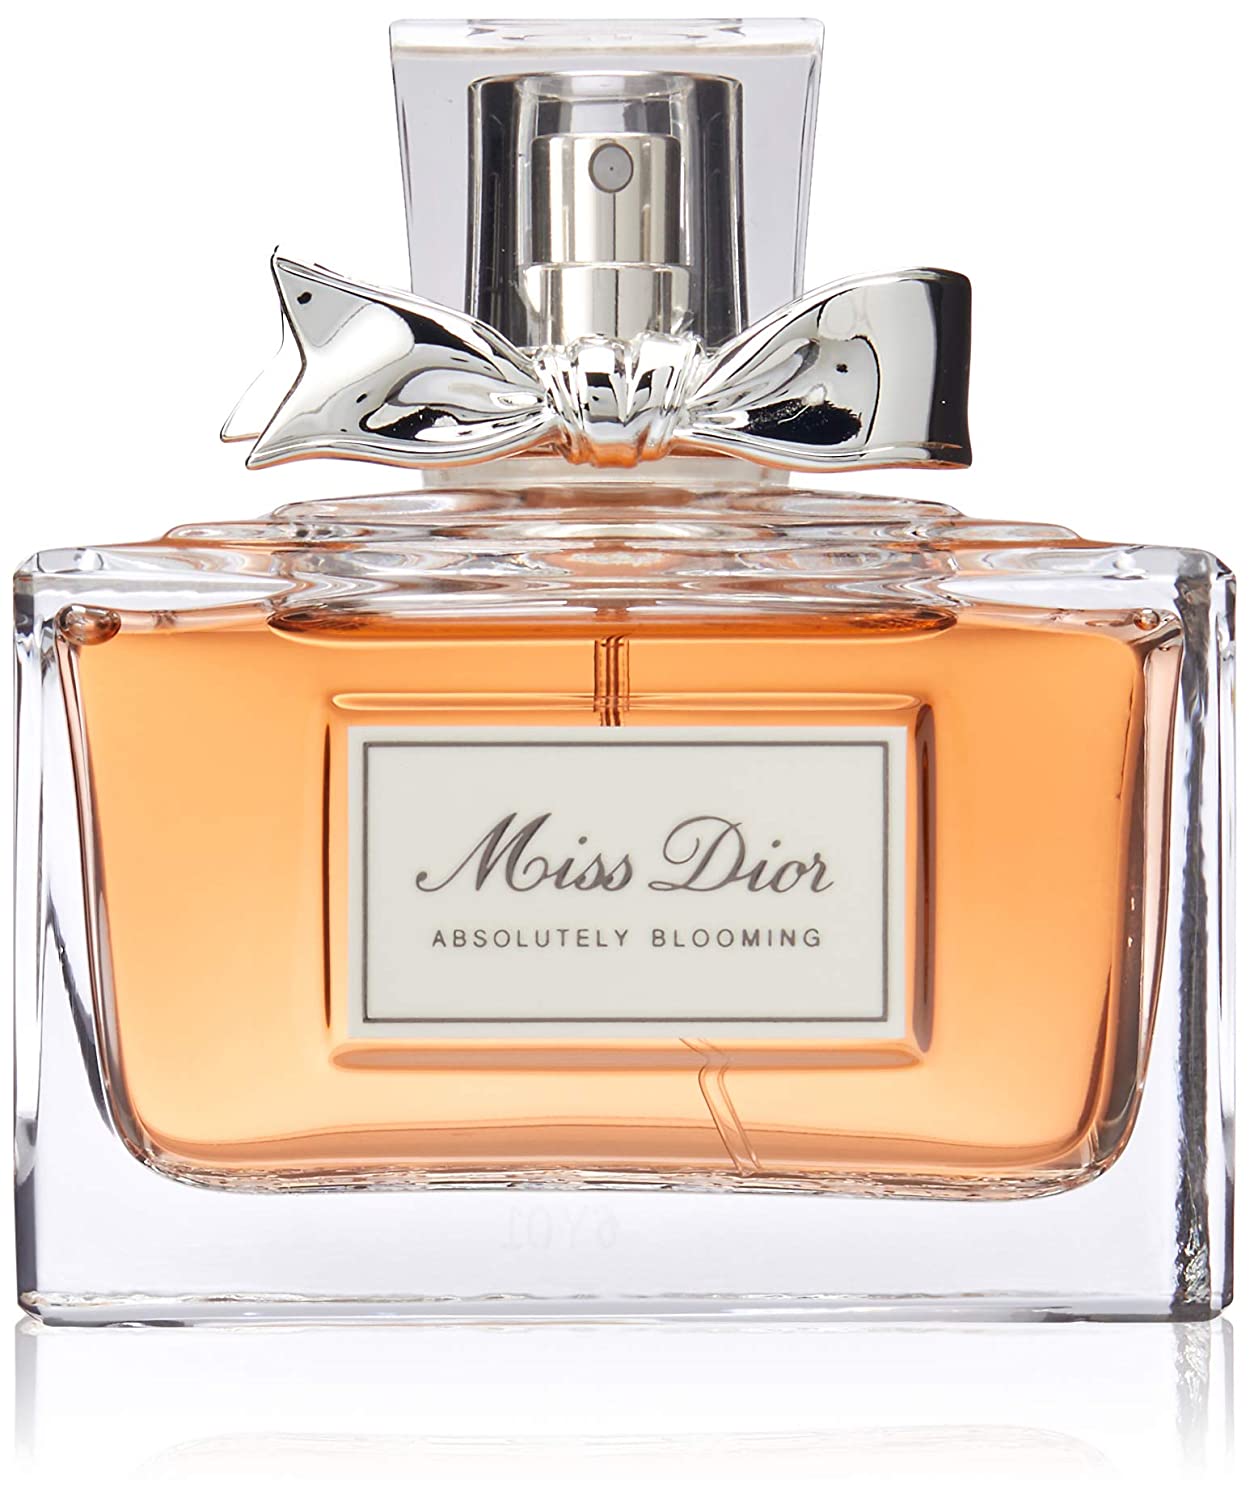 Miss Dior Absolutely Blooming 50ml edp  Perfume Cologne  Discount  Cosmetics